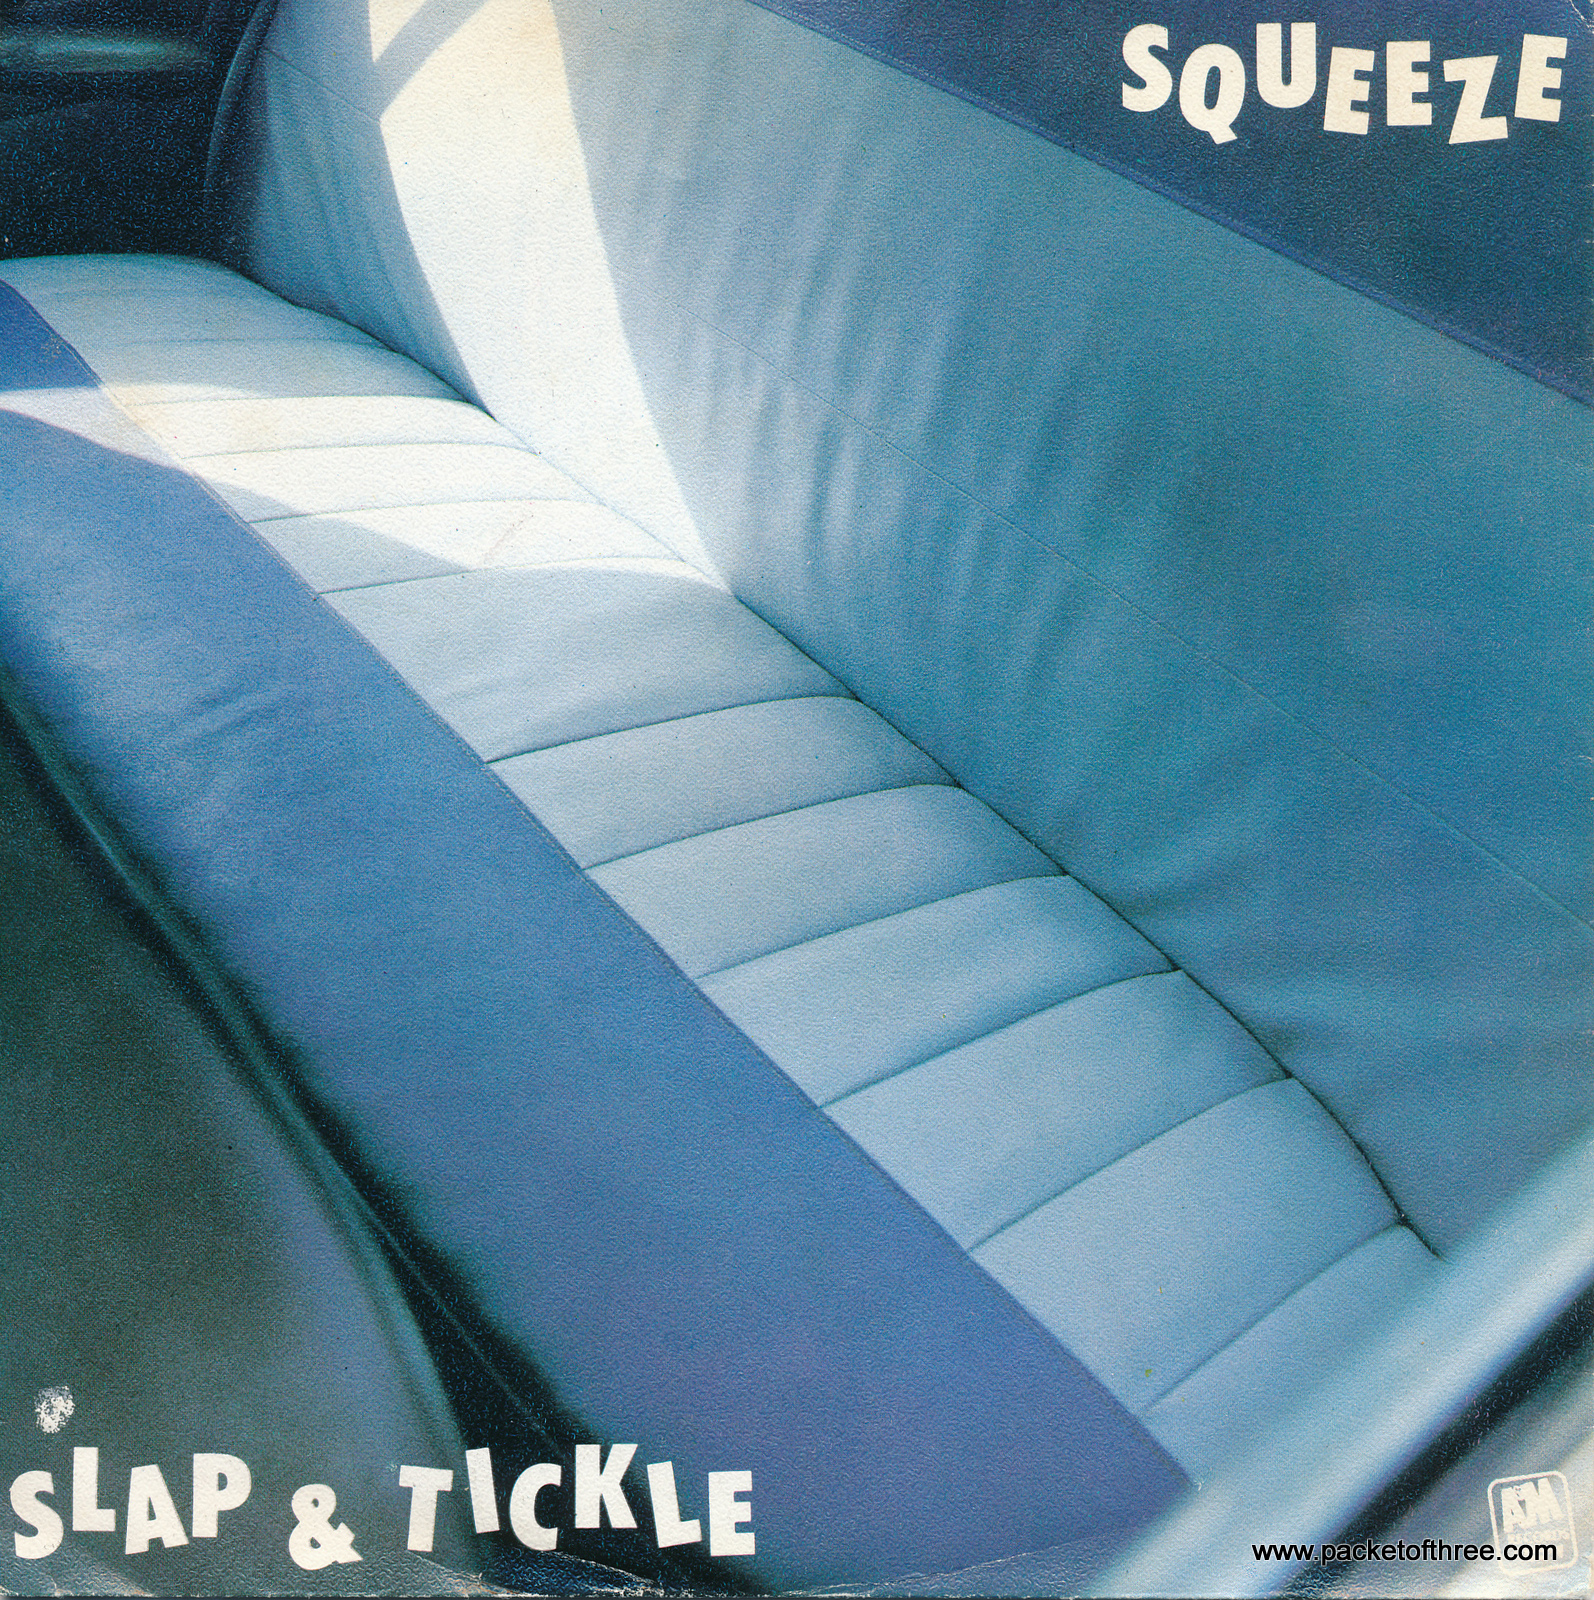 Slap and Tickle - Netherlands - 7" - picture sleeve